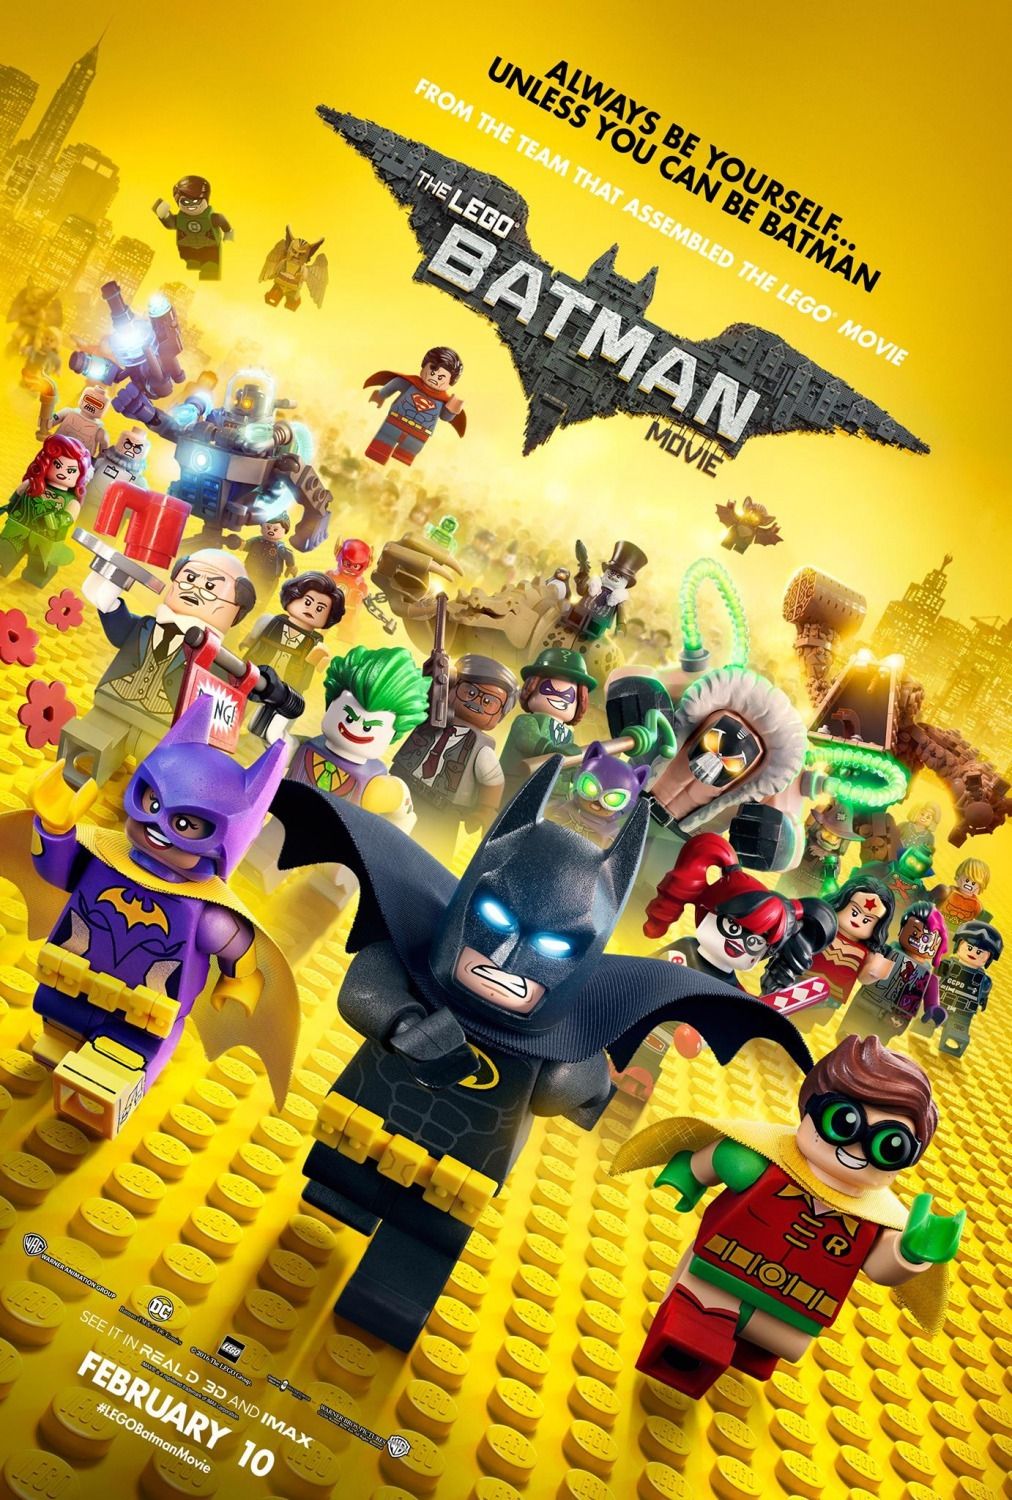 The poster for The LEGO Batman Movie